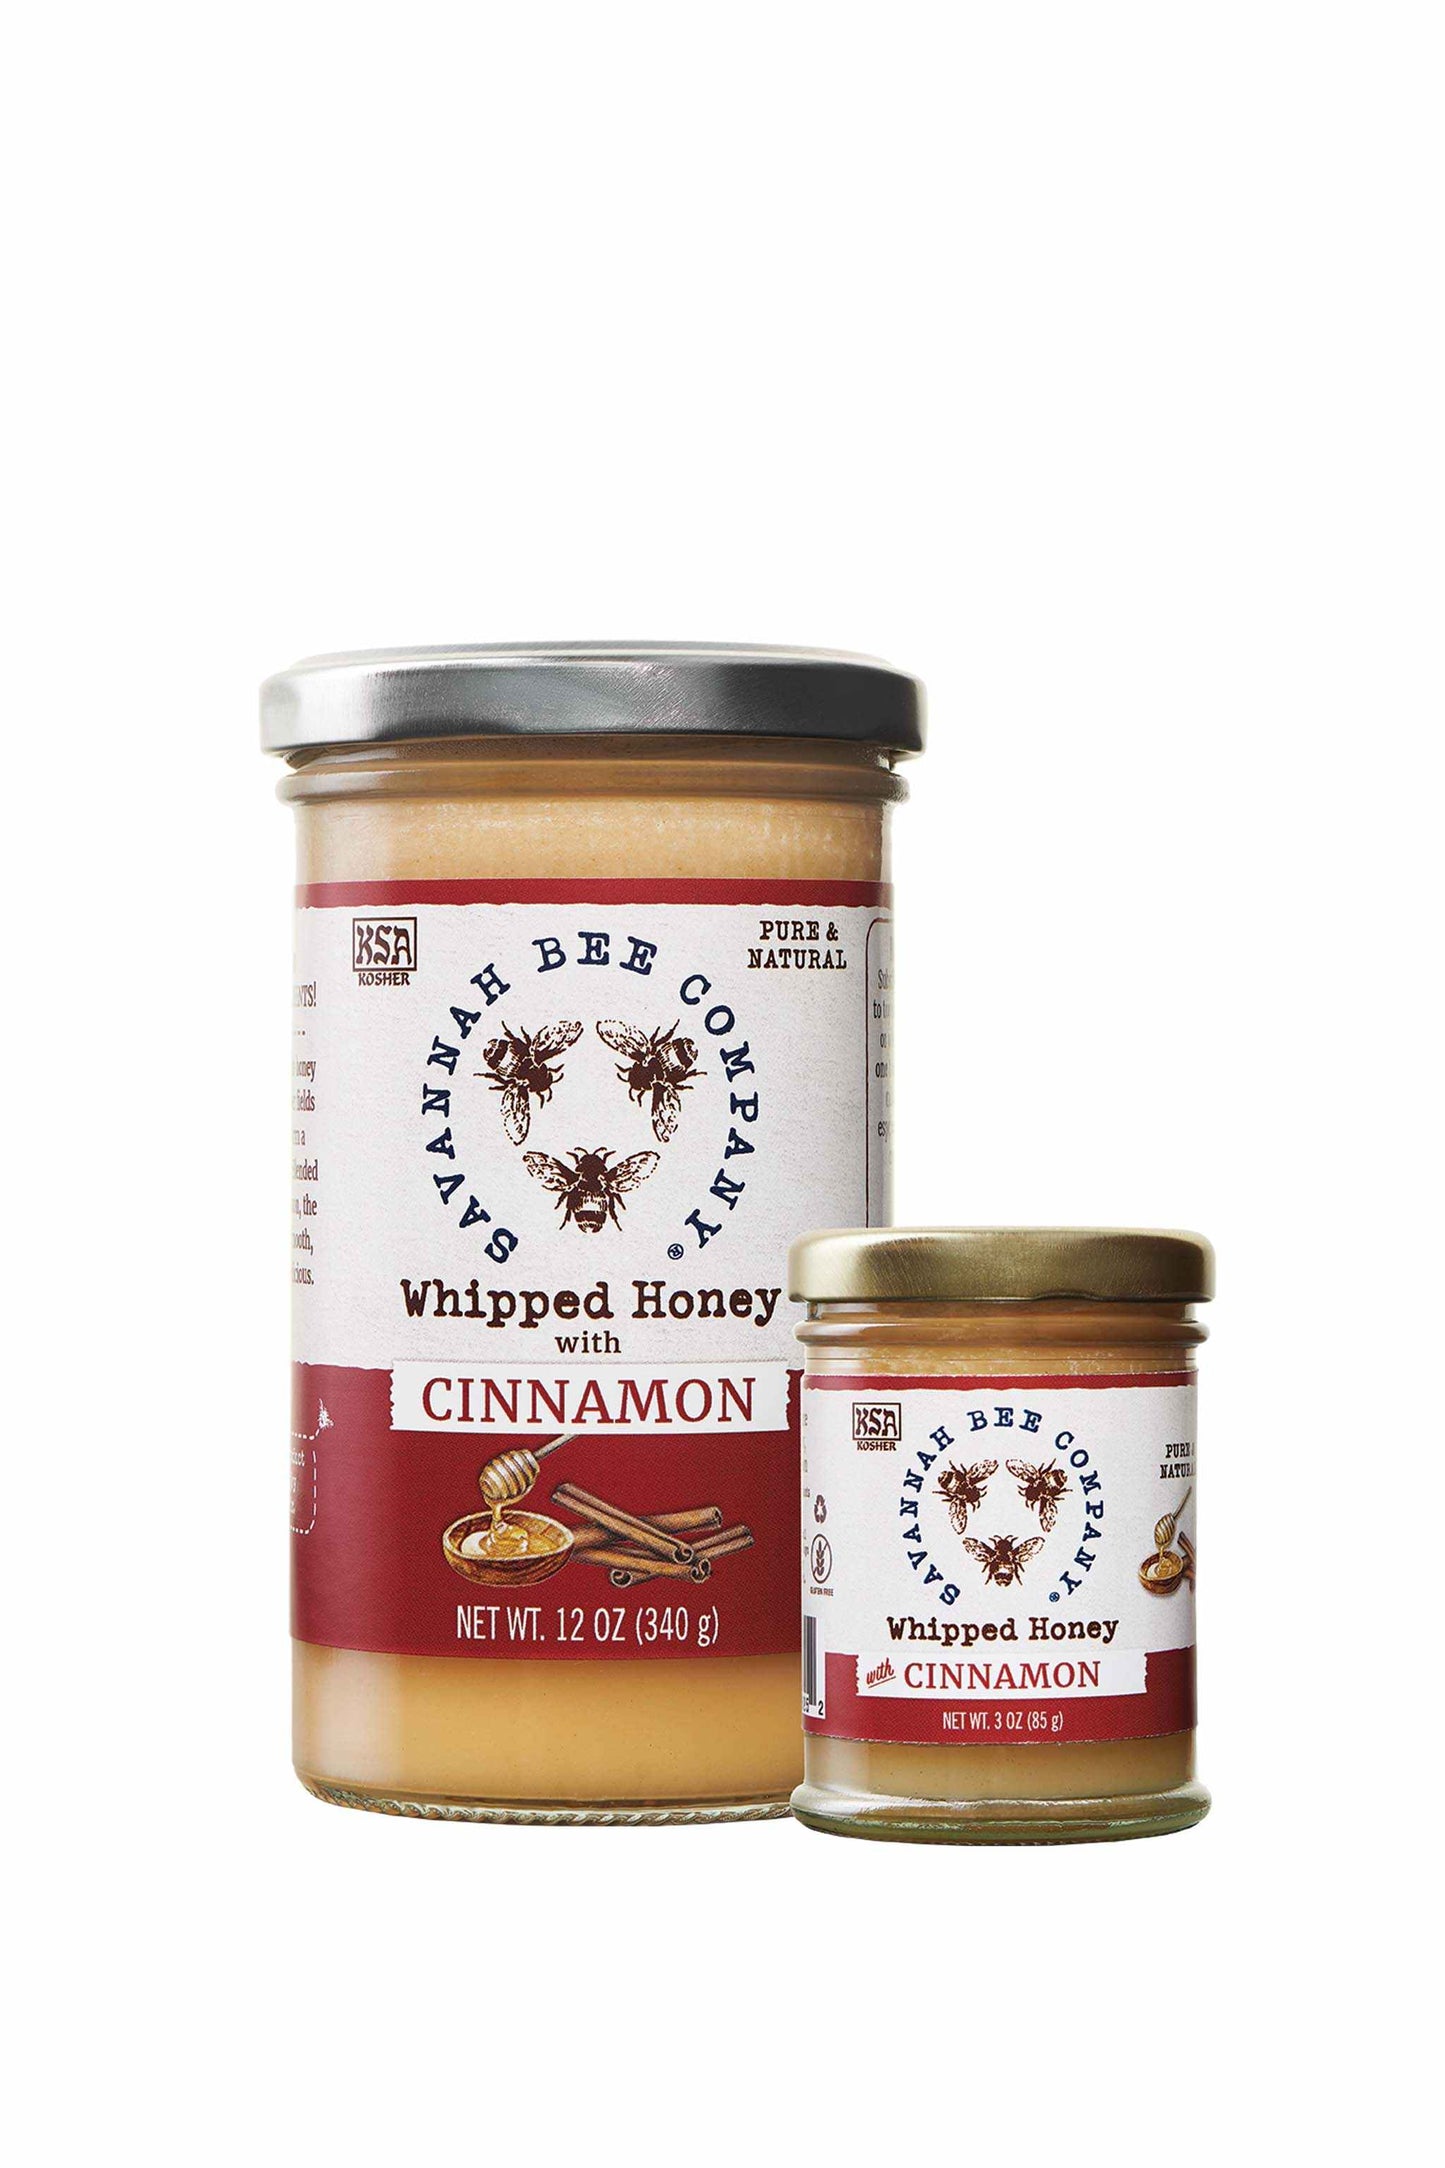 Whipped Honey with Cinnamon 12 oz. and 3 oz. 